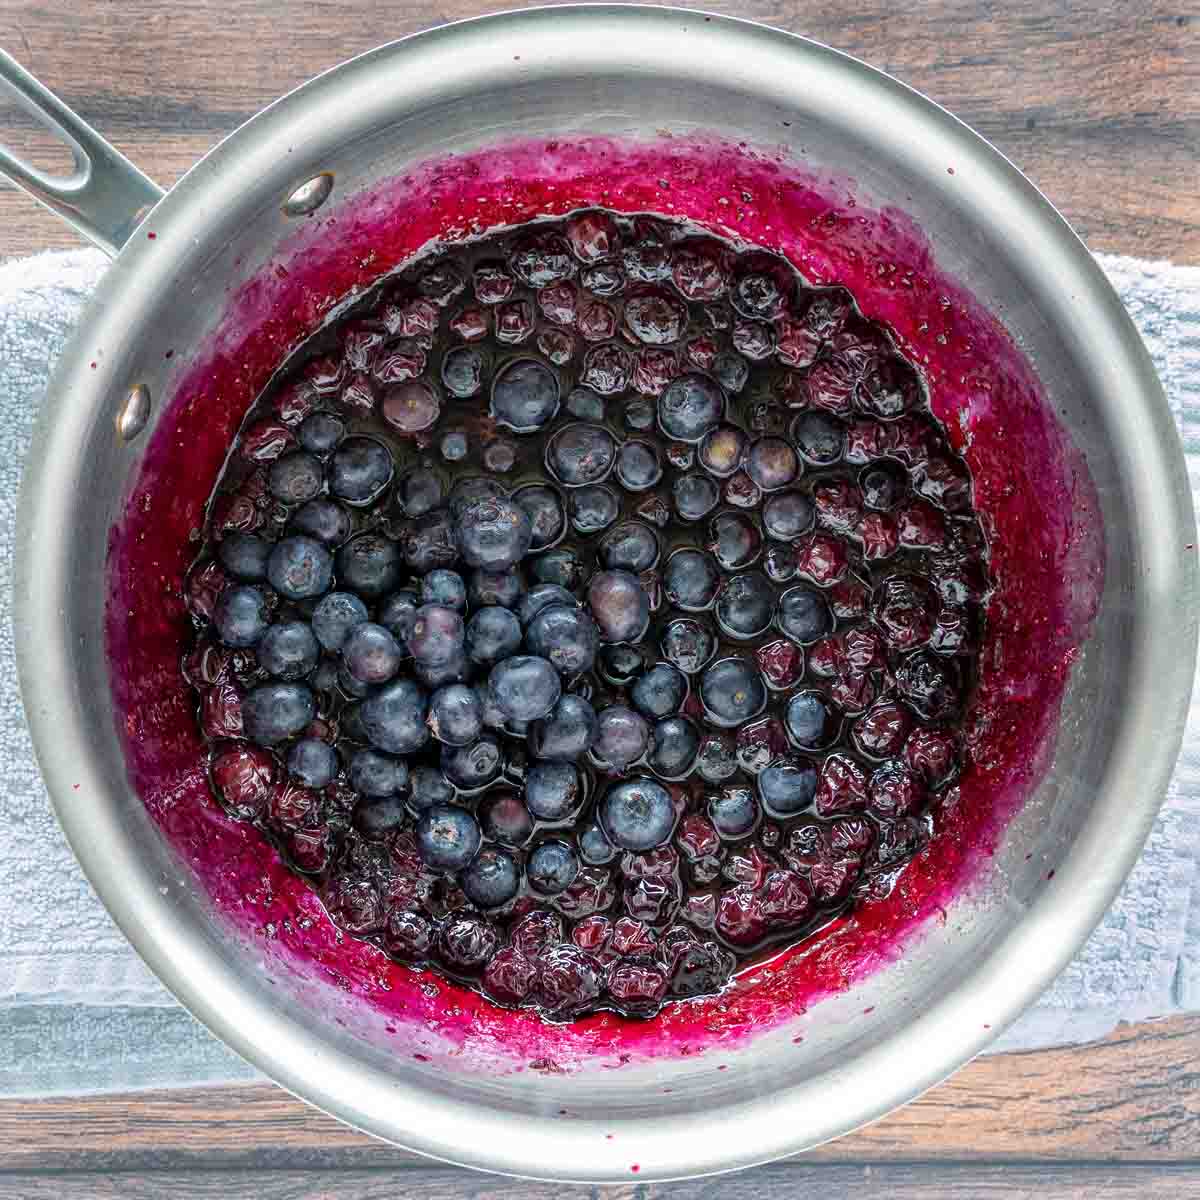 more blueberries added to pan, step 2.